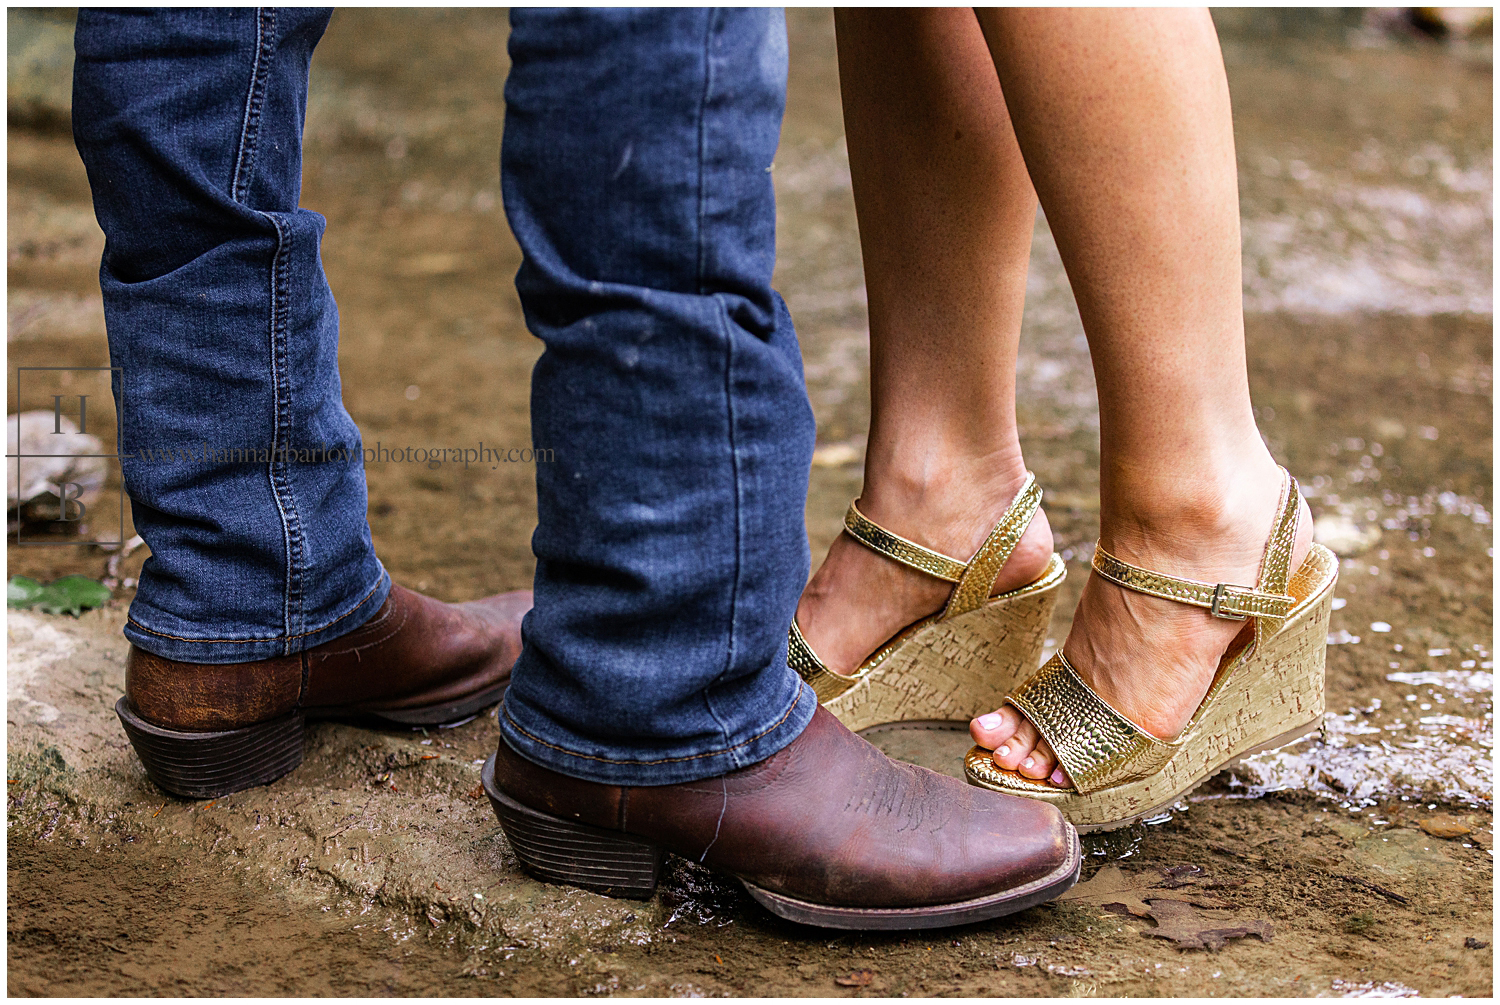 Couples feet are photographed boots and heels in creek.